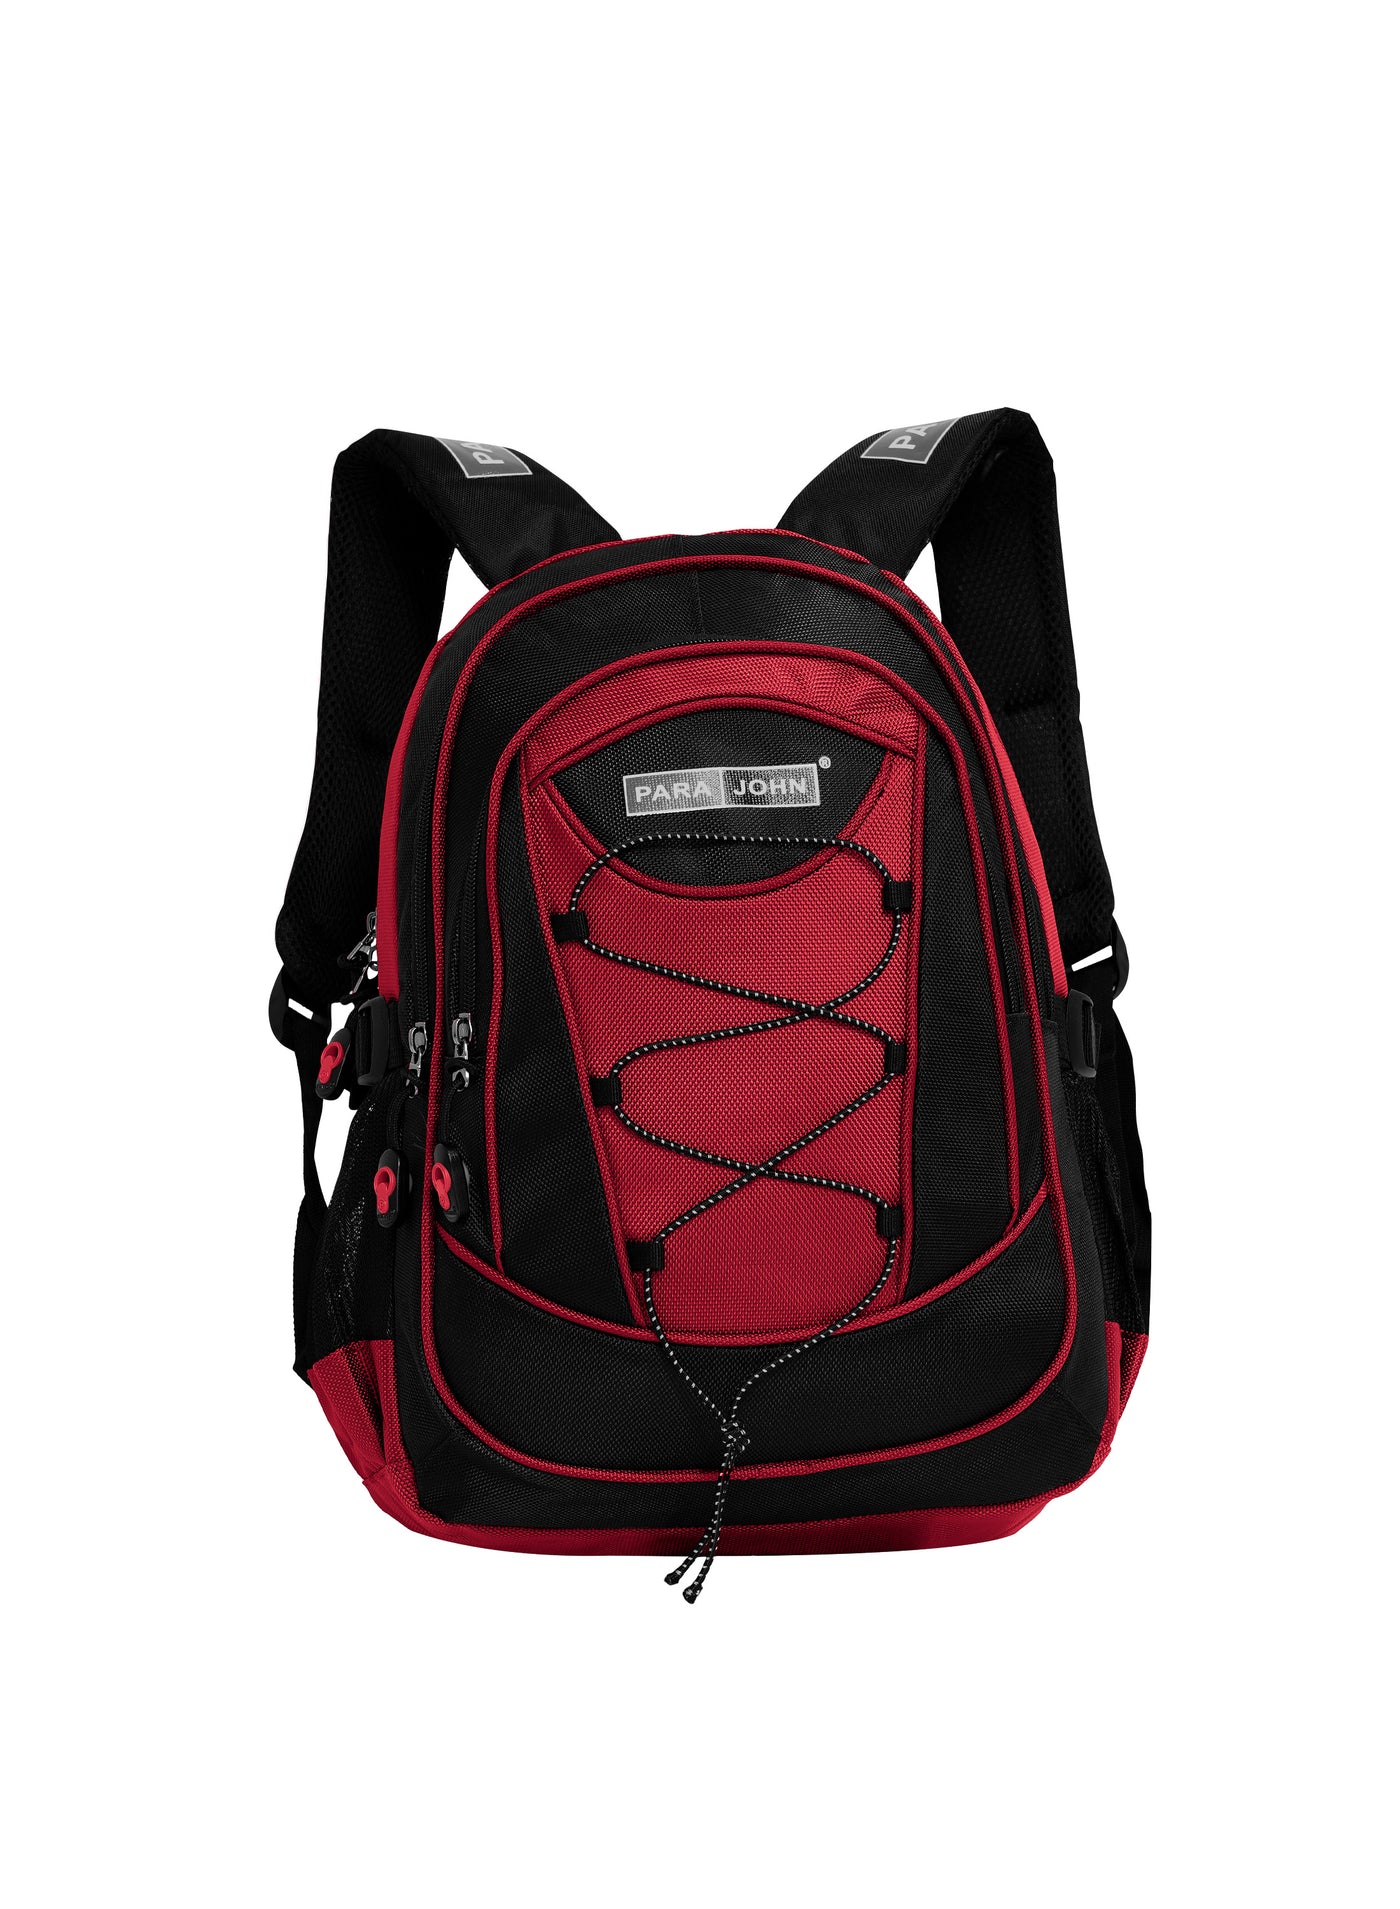 Classic Students School Backpack Red 16 Inch